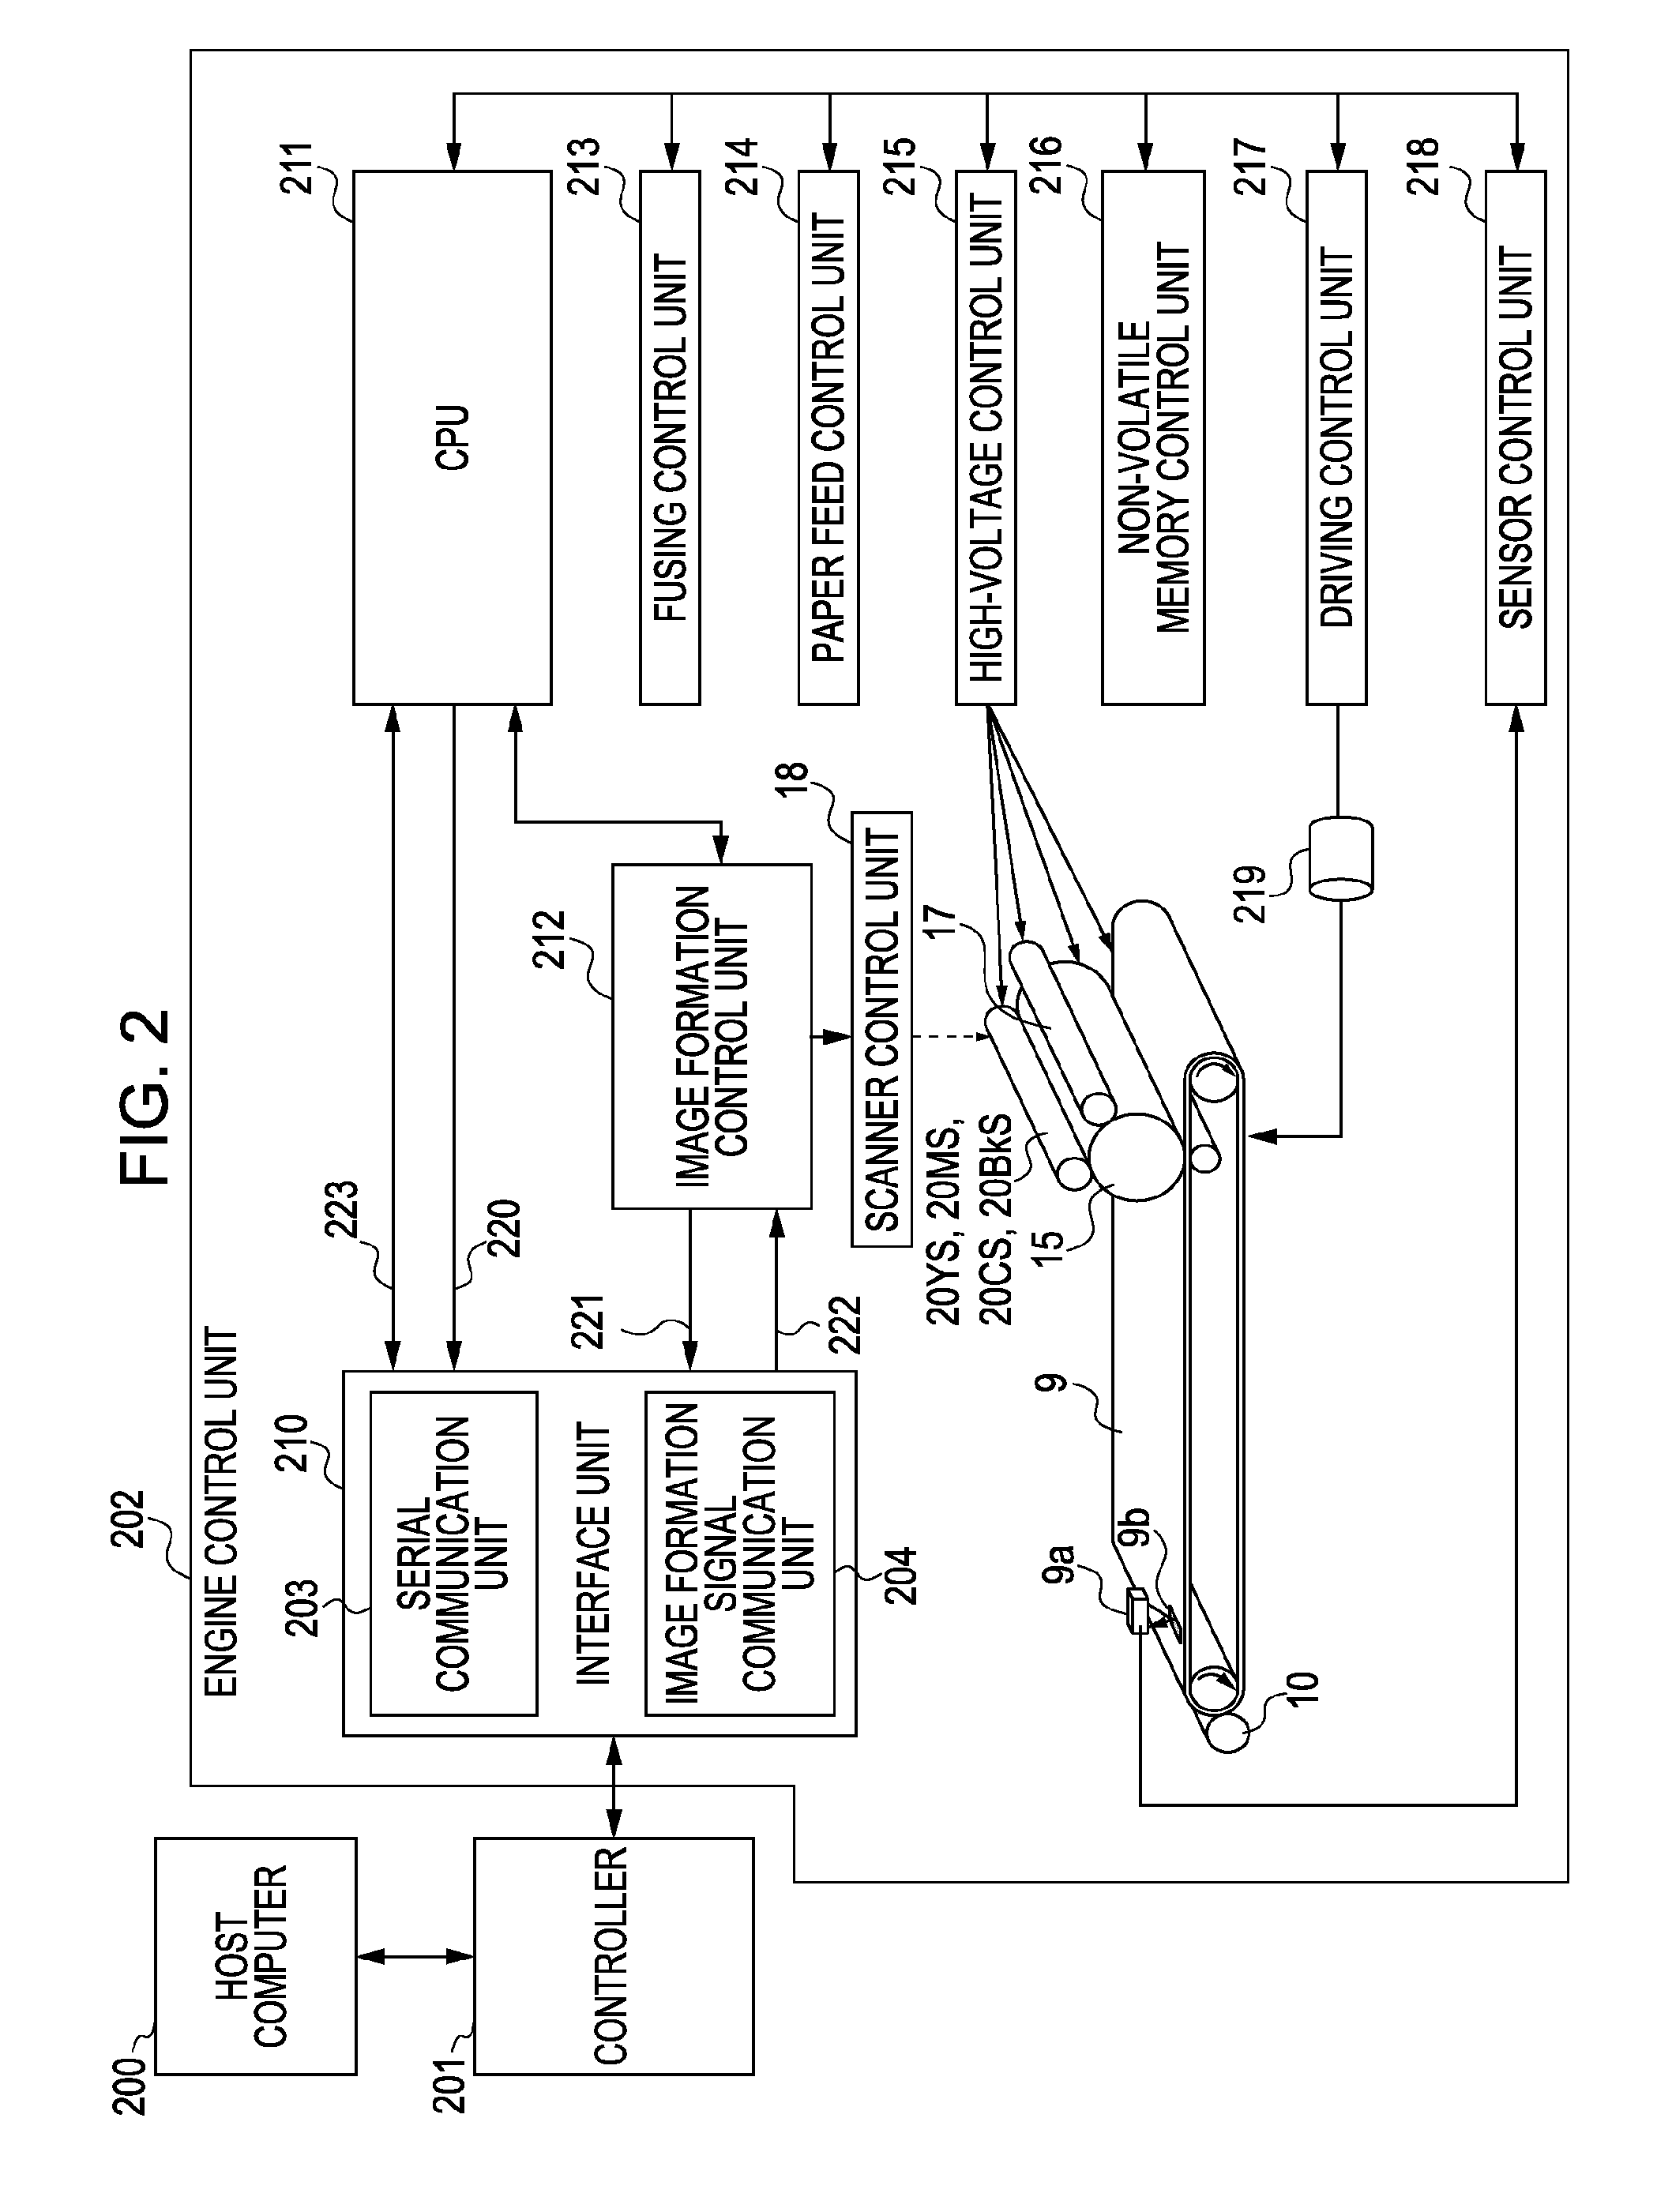 Image forming apparatus for controlling speed of intermediate transfer member according to image